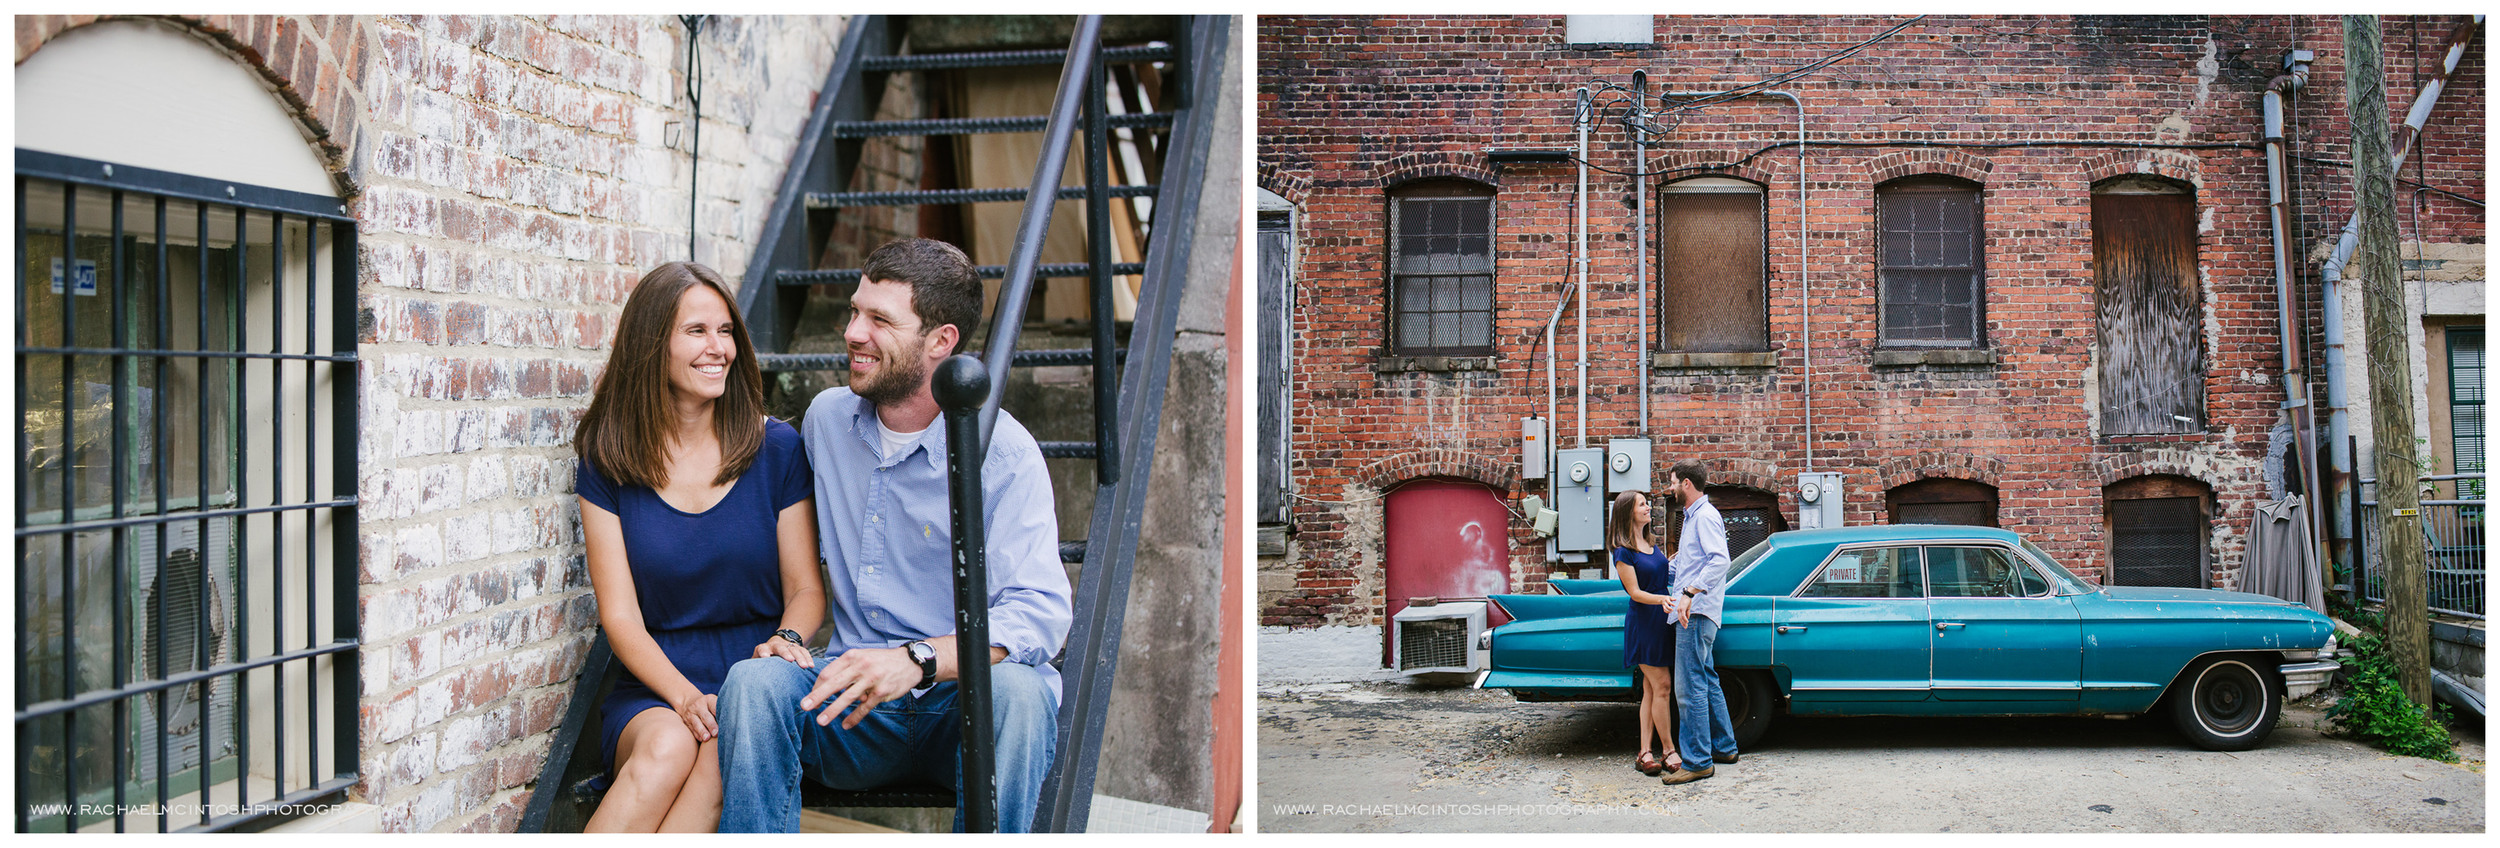 Down Town Asheville Engagement Session- Asheville Wedding Photography-25.jpg